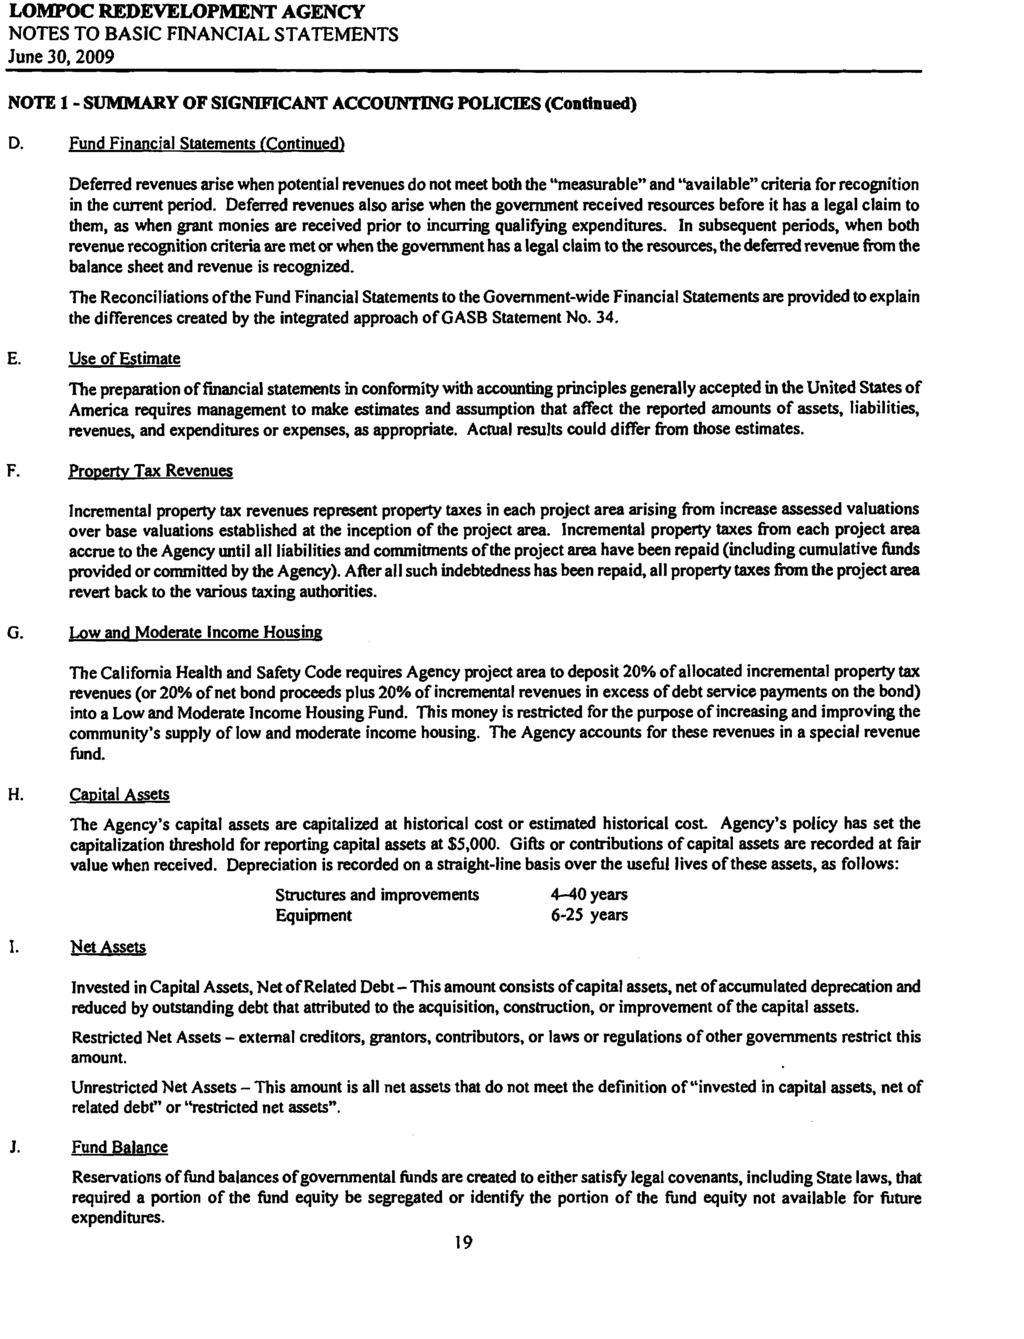 LOMPOC REDEVELOPMENT AGENCY NOTES TO BASIC FINANCIAL STATEMENTS June 30,2009 NOTE 1 - SUMMARY OF SIGNIFICANT ACCOUNTING POLICIES (Continued) D.